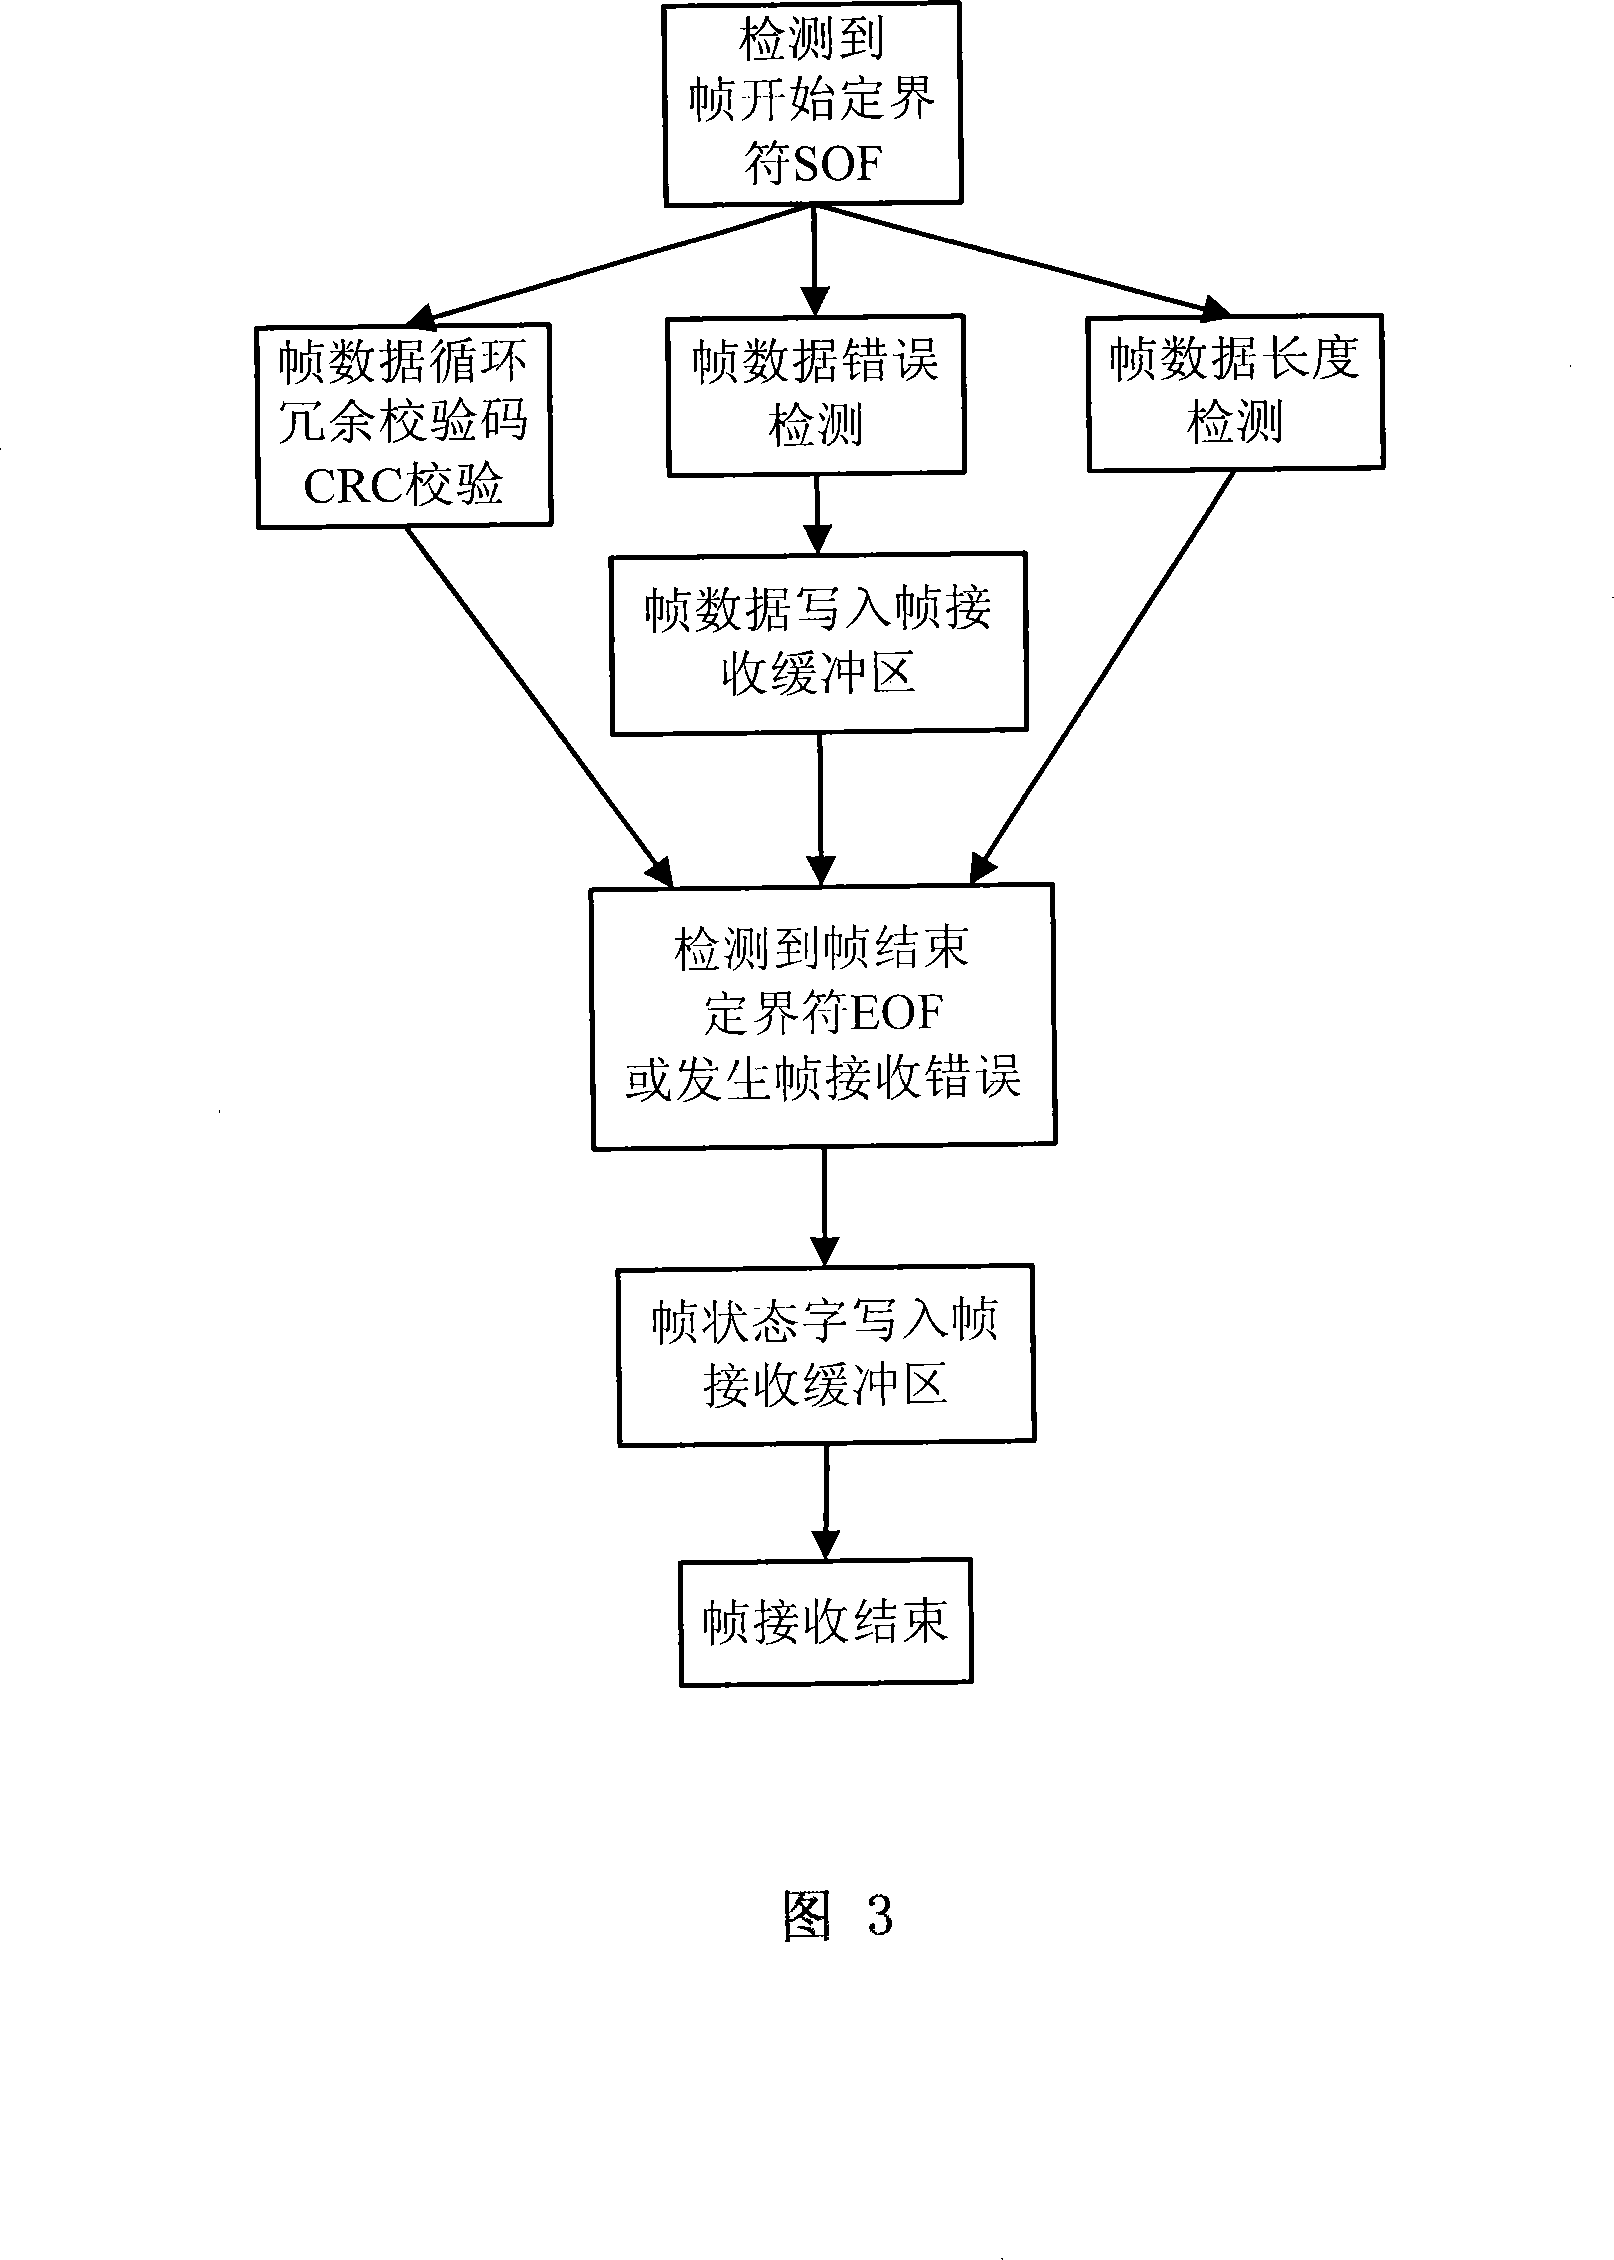 Intellectual property nucleus of optical fiber channel